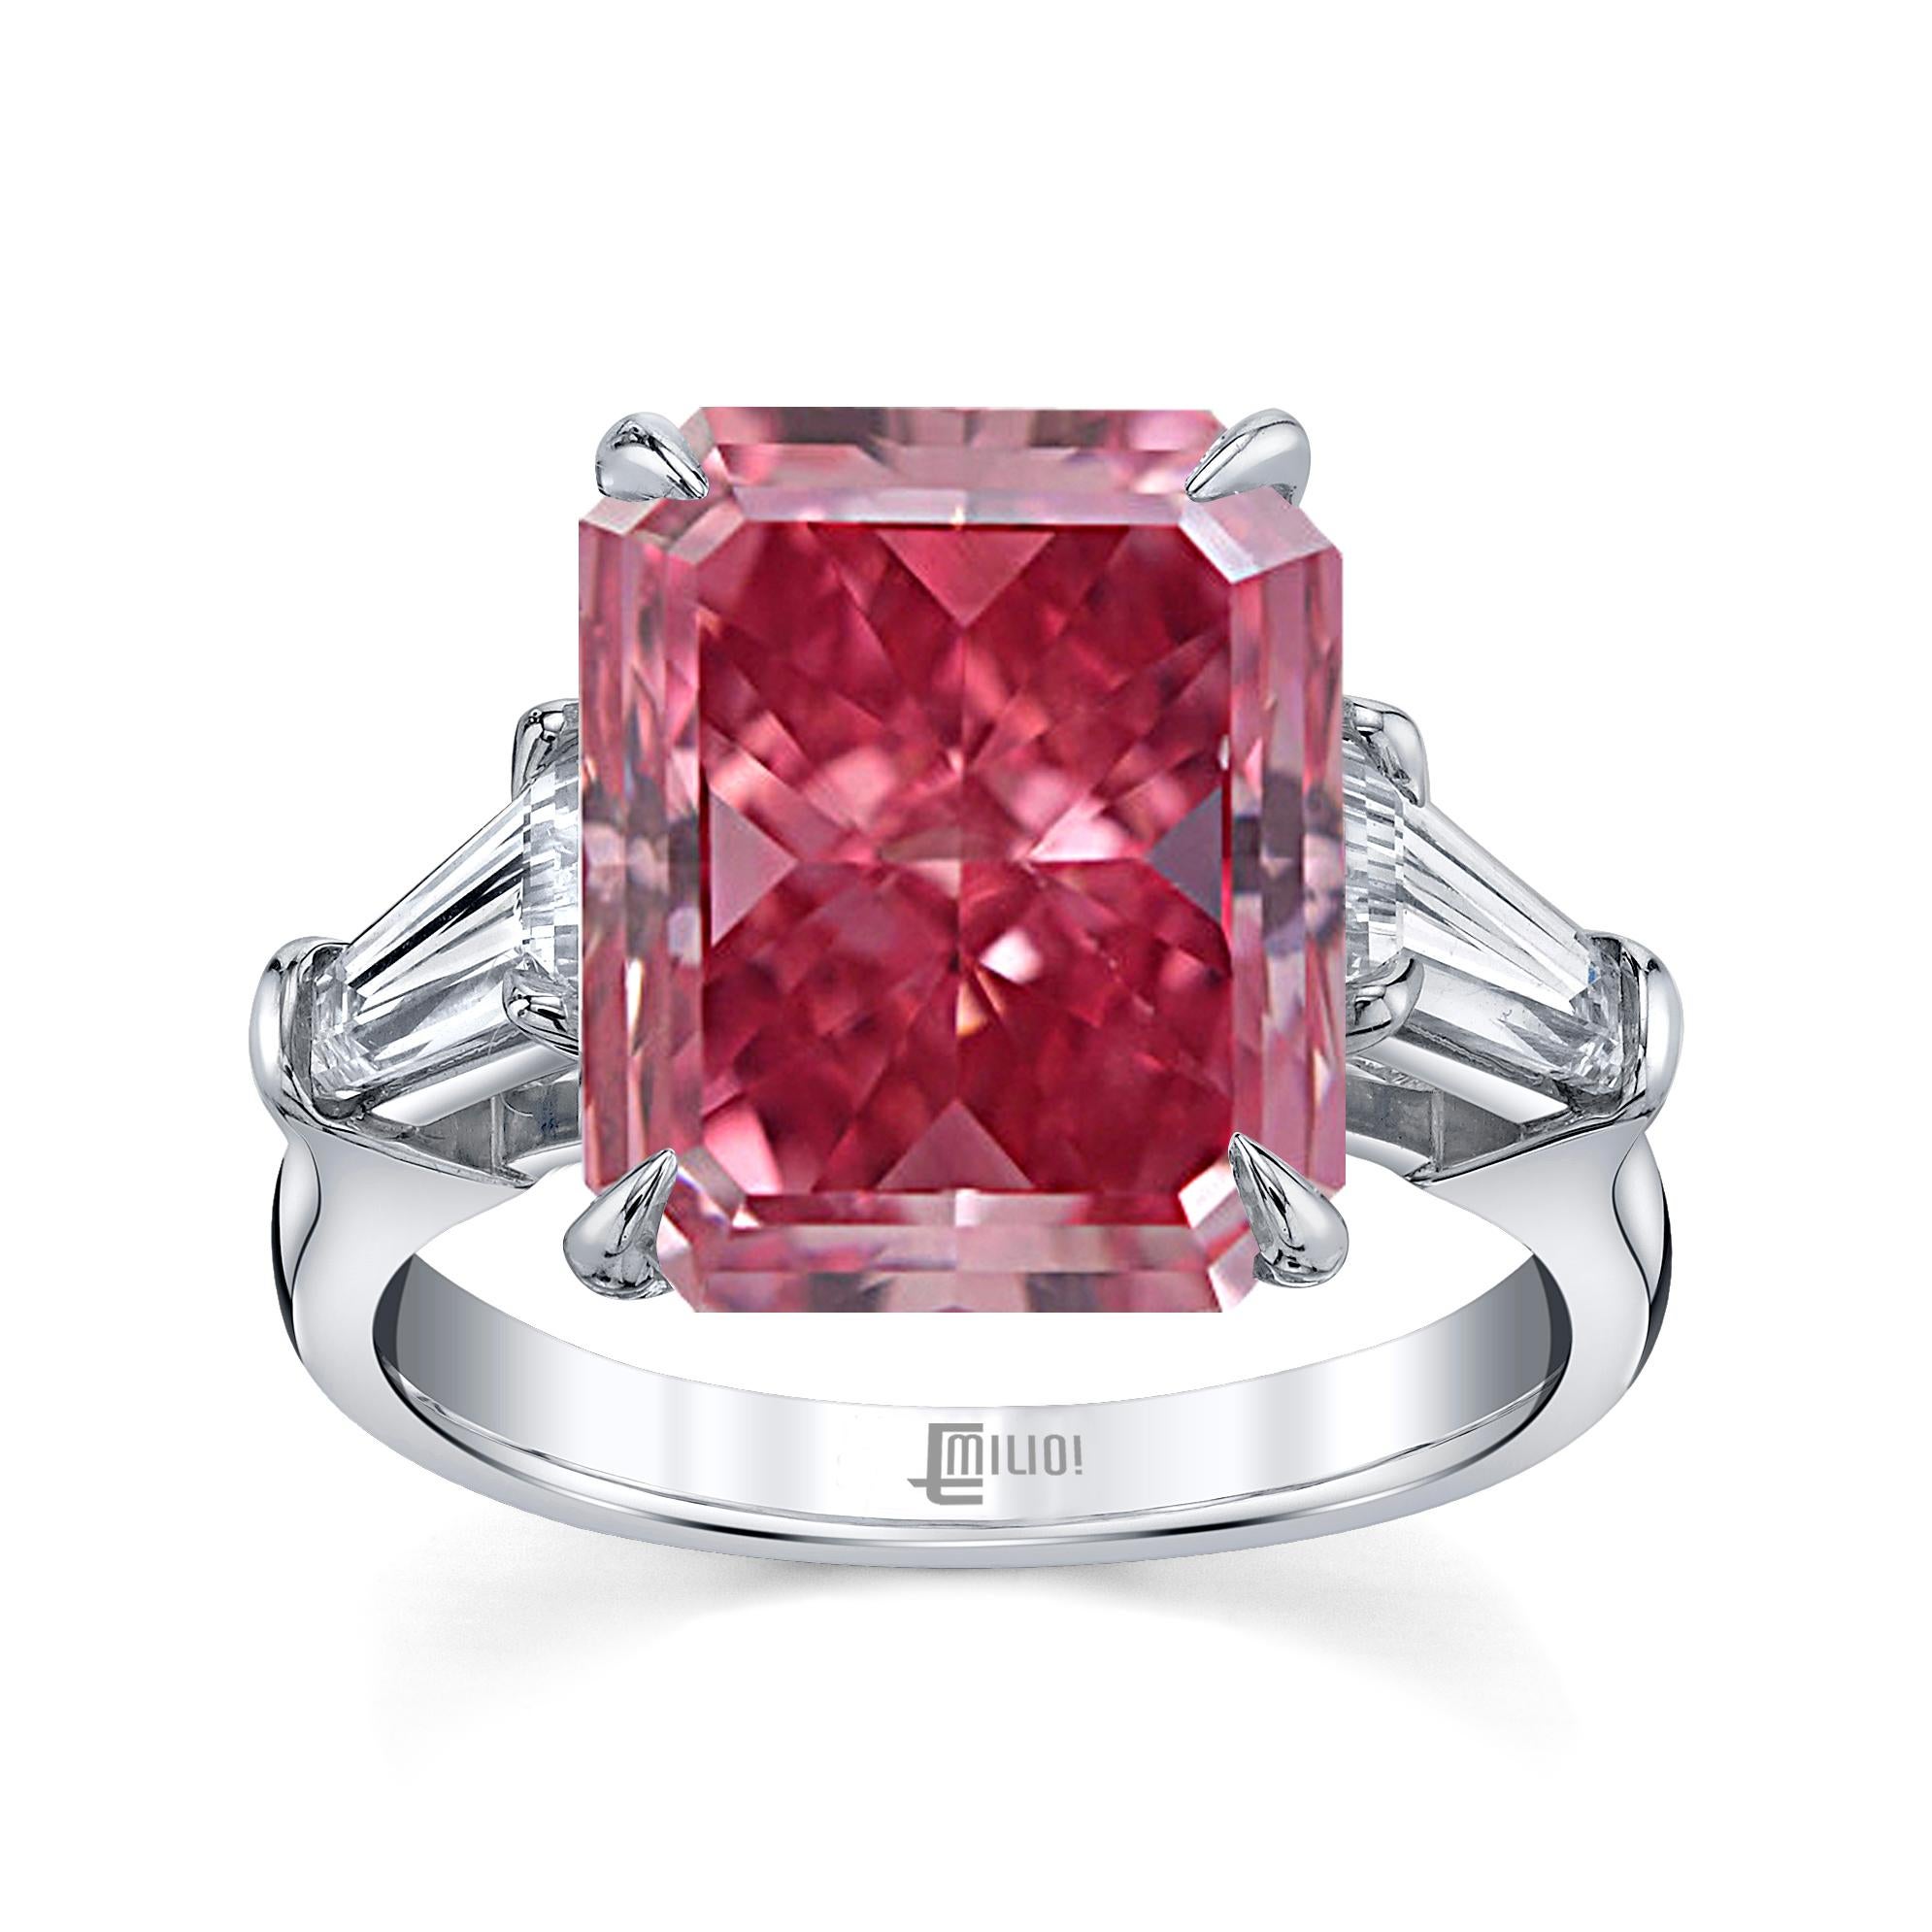 From The Museum Vault At Emilio Jewelry New York,
A magical ring featuring the best of the best, Gia certified Vivid pure pink diamond center just under 1 carat. This diamond does not have an overtone. Approximate total weight listed in the title.